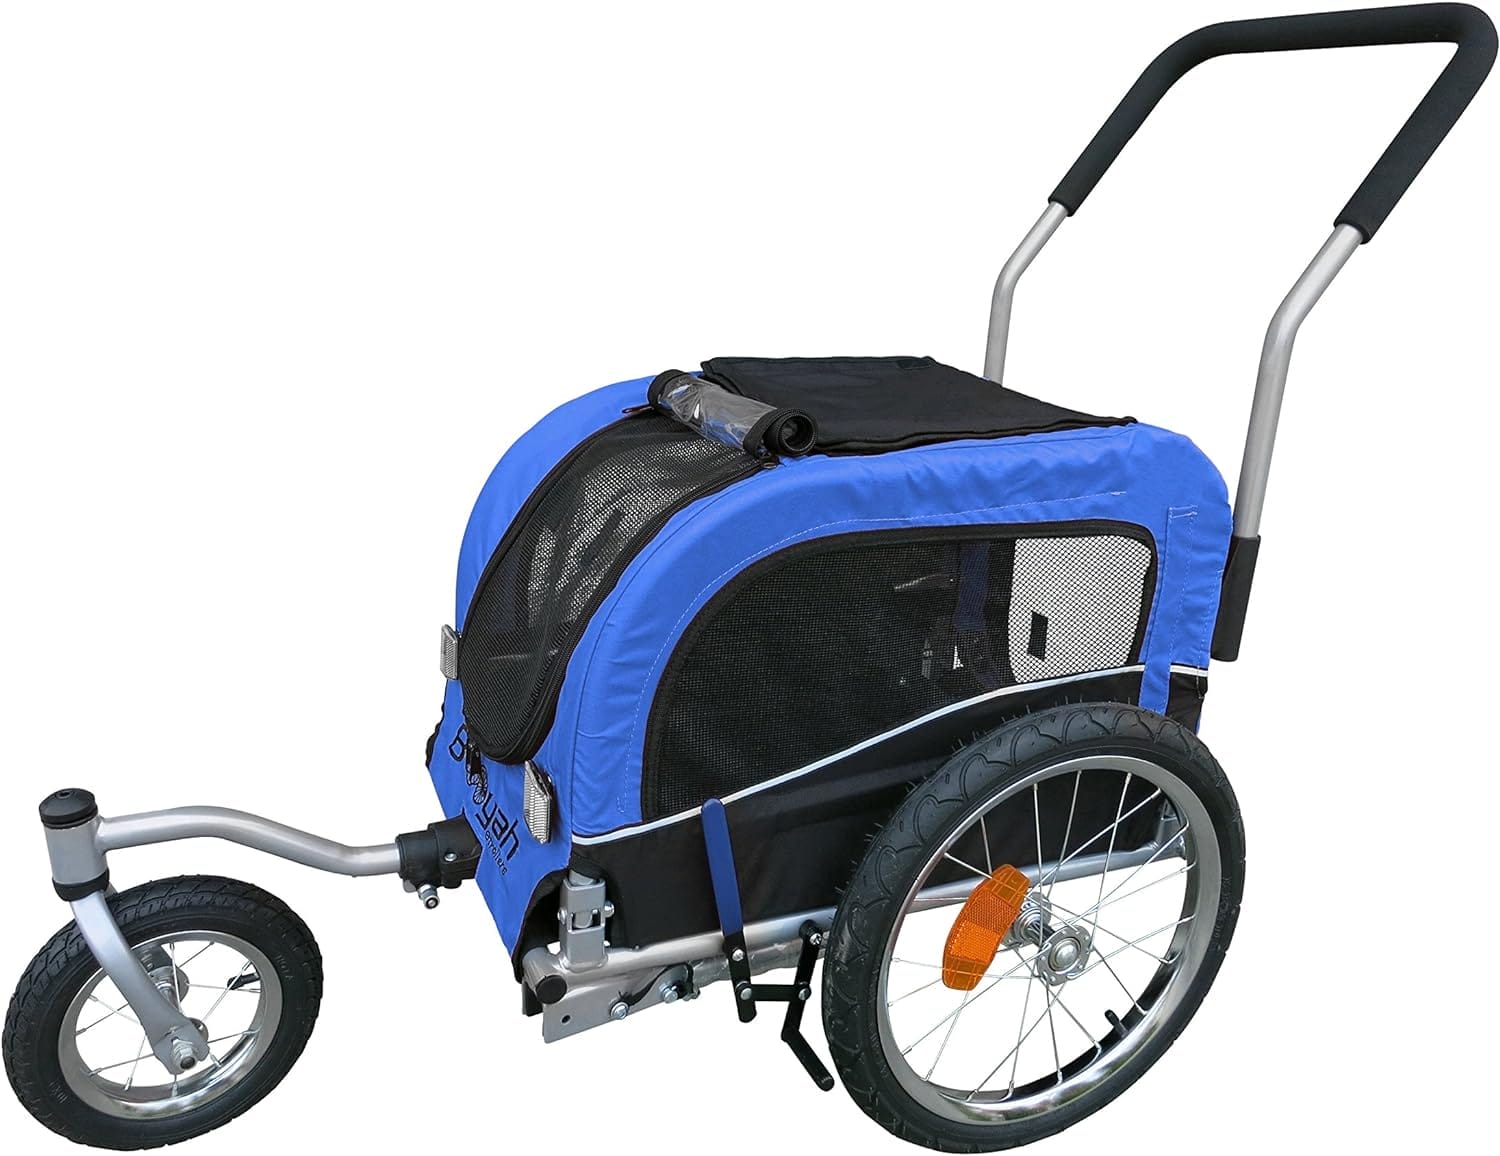 small pet dog stroller and bike bicycle trailer blue review 1